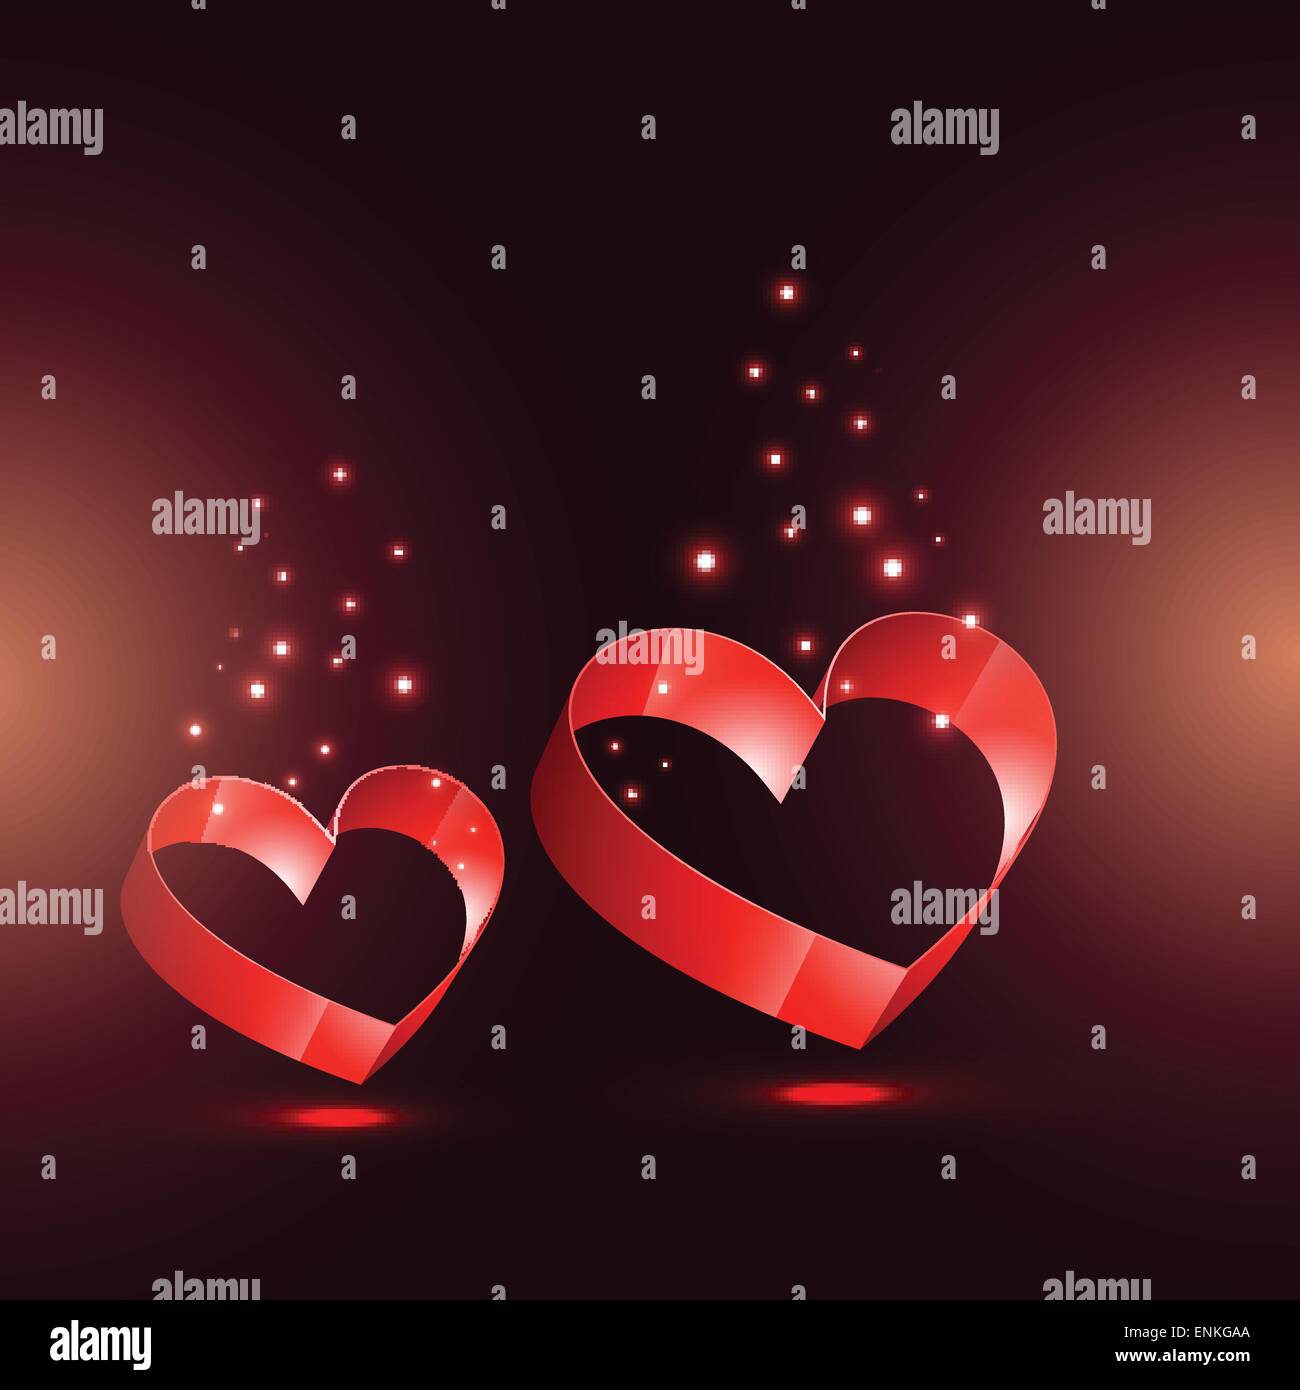 vector beautiful hearts illustration with glow effect Stock Vector